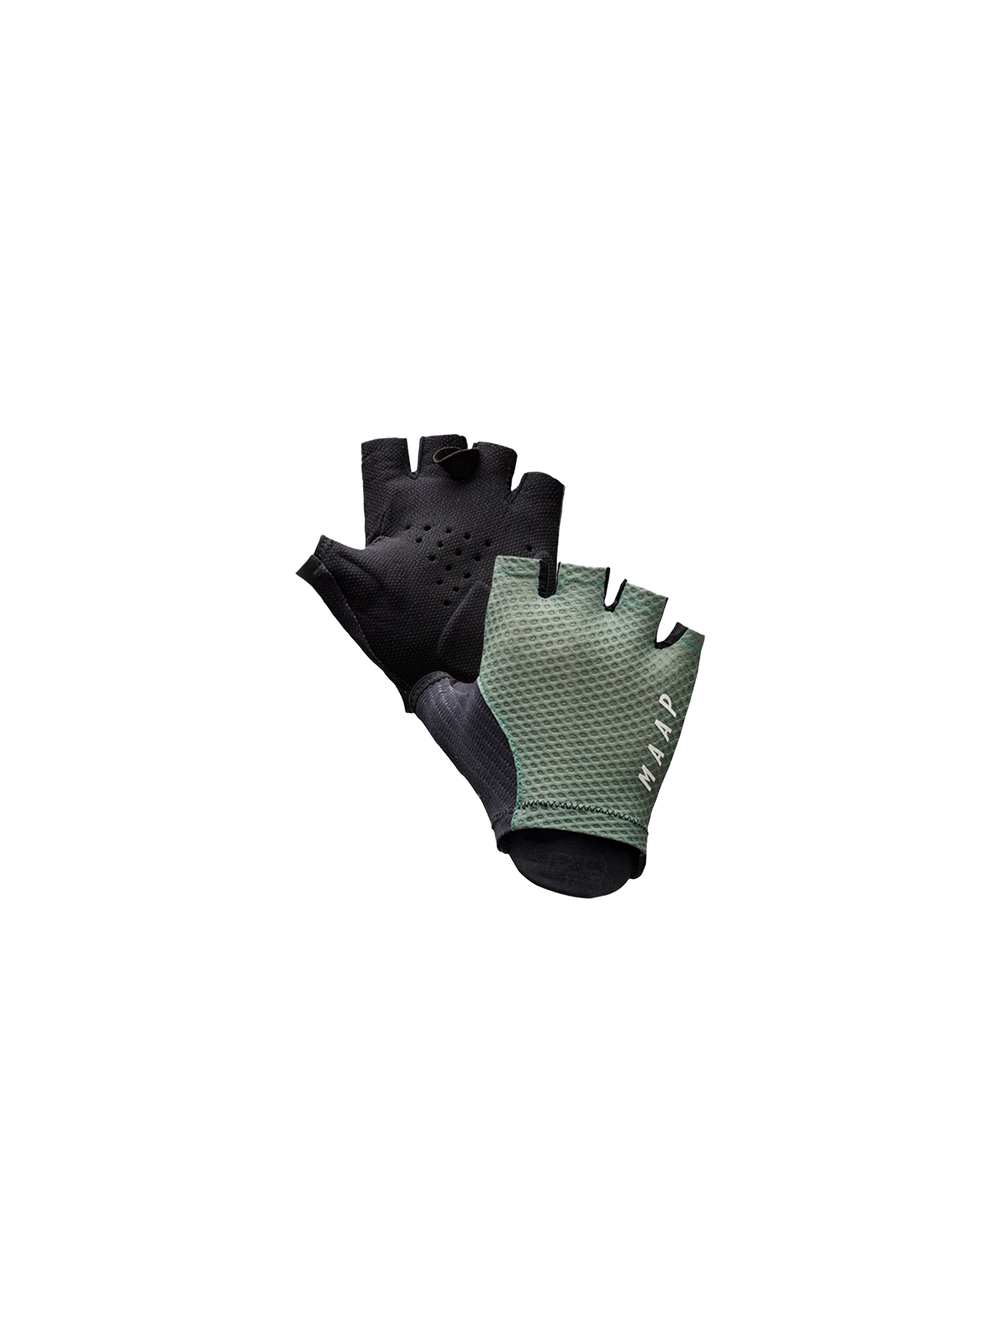 Product Image for Pro Race Mitt